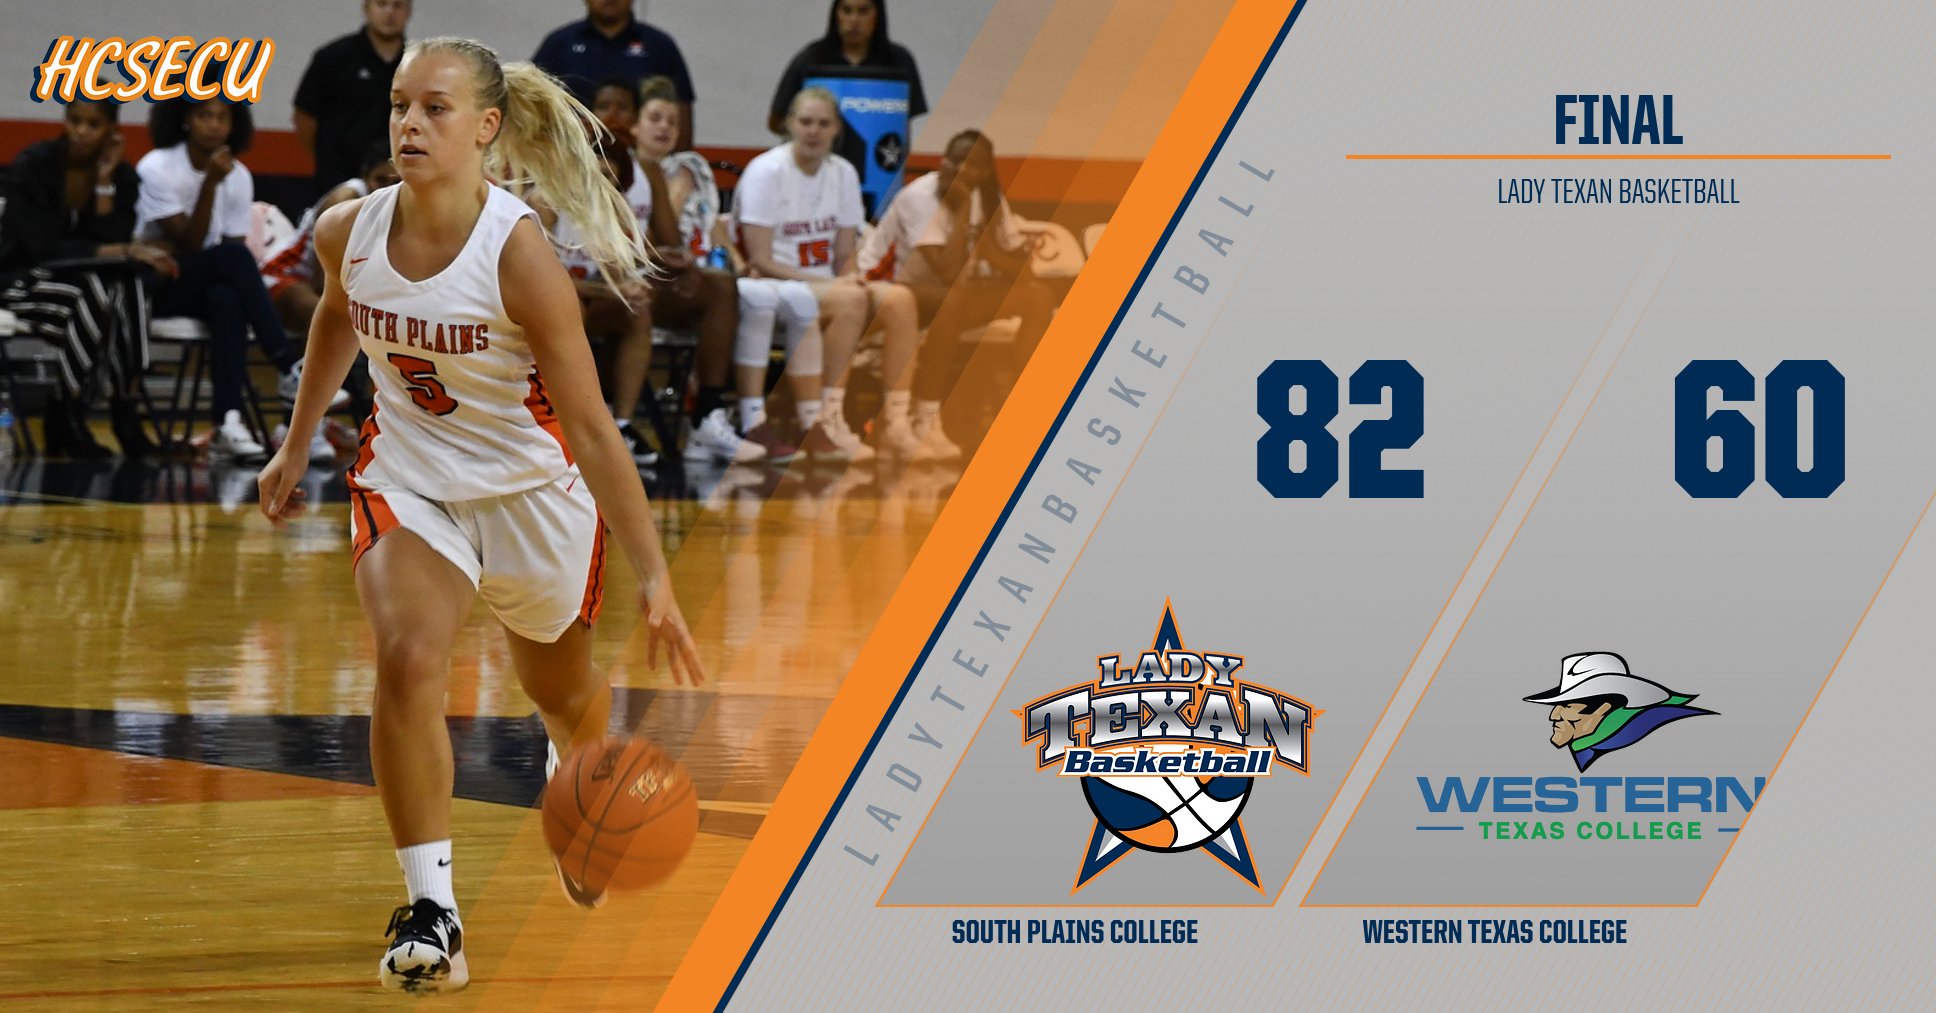 Four players record double figures as Lady Texans pummel Western Texas College 82-60 Monday